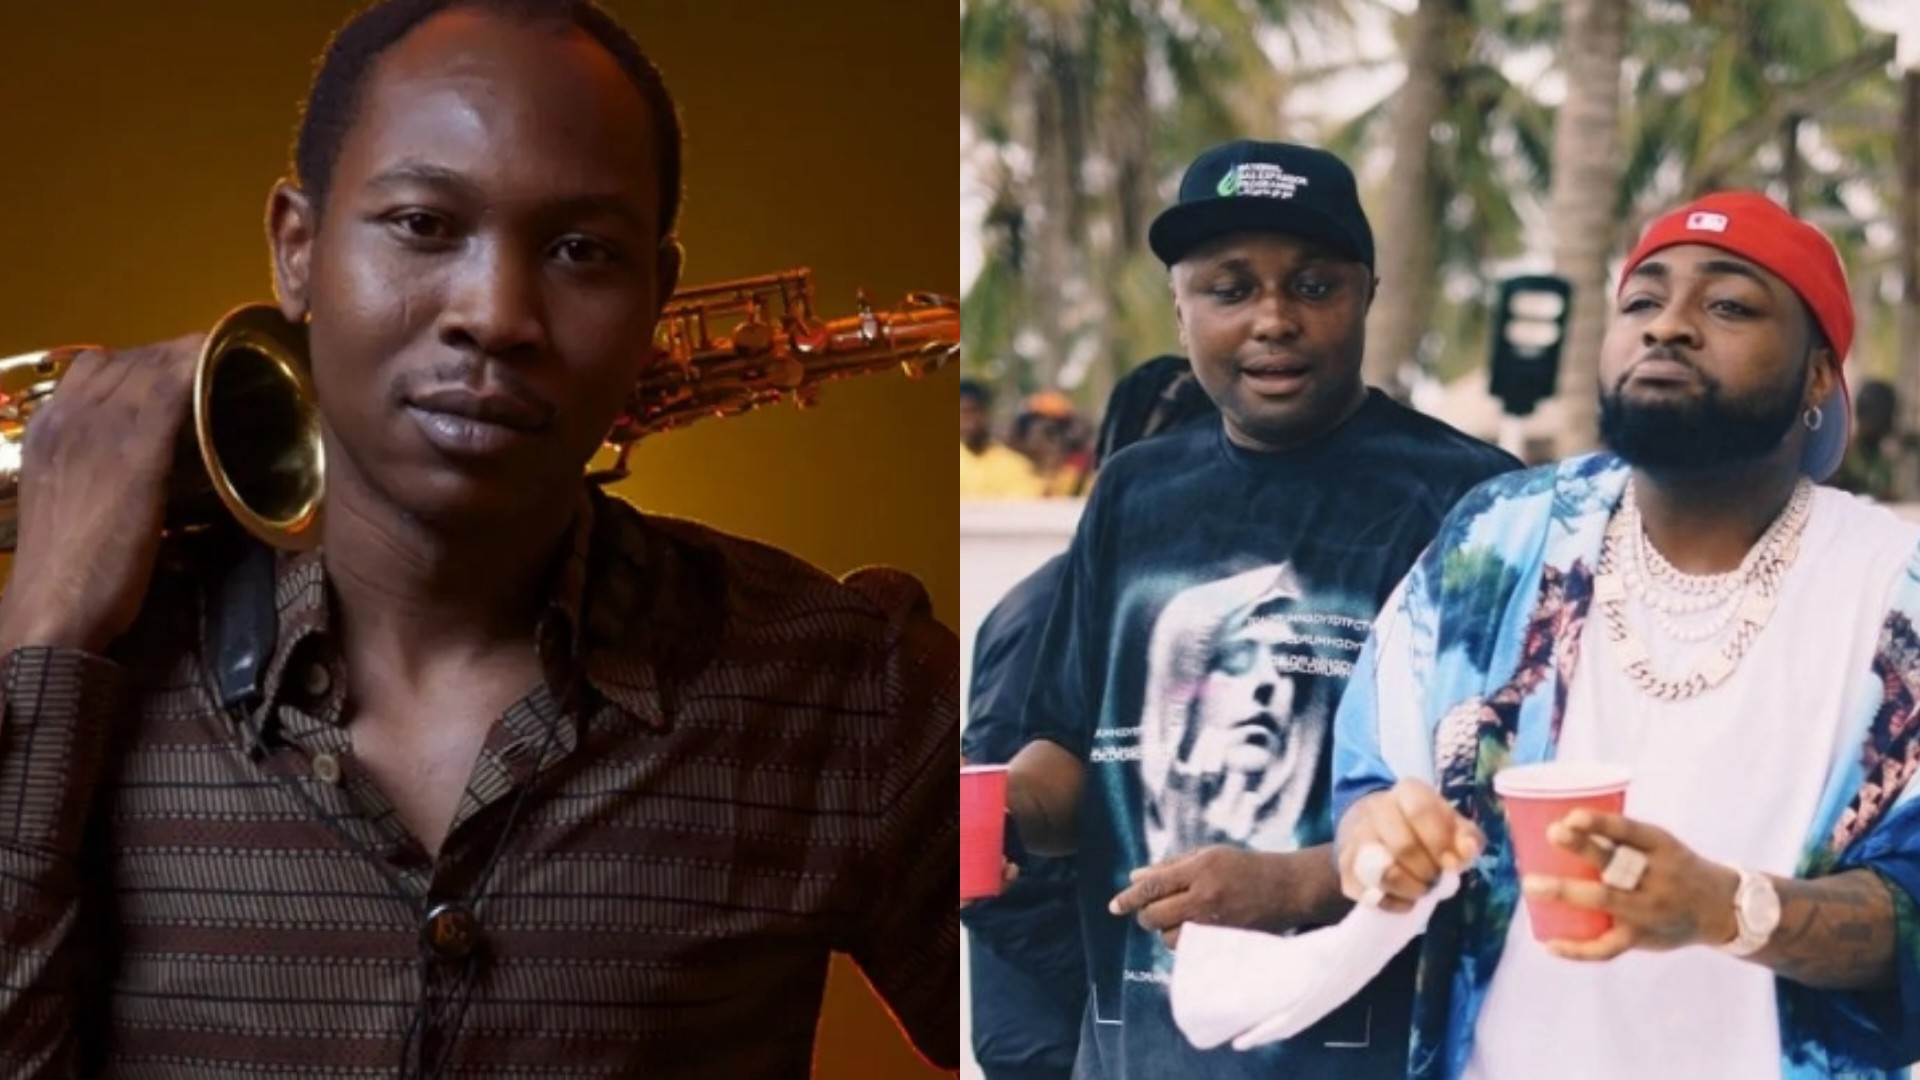 “Most Nigerian celebrities behave like Israel in front of politicians” – Seun Kuti says